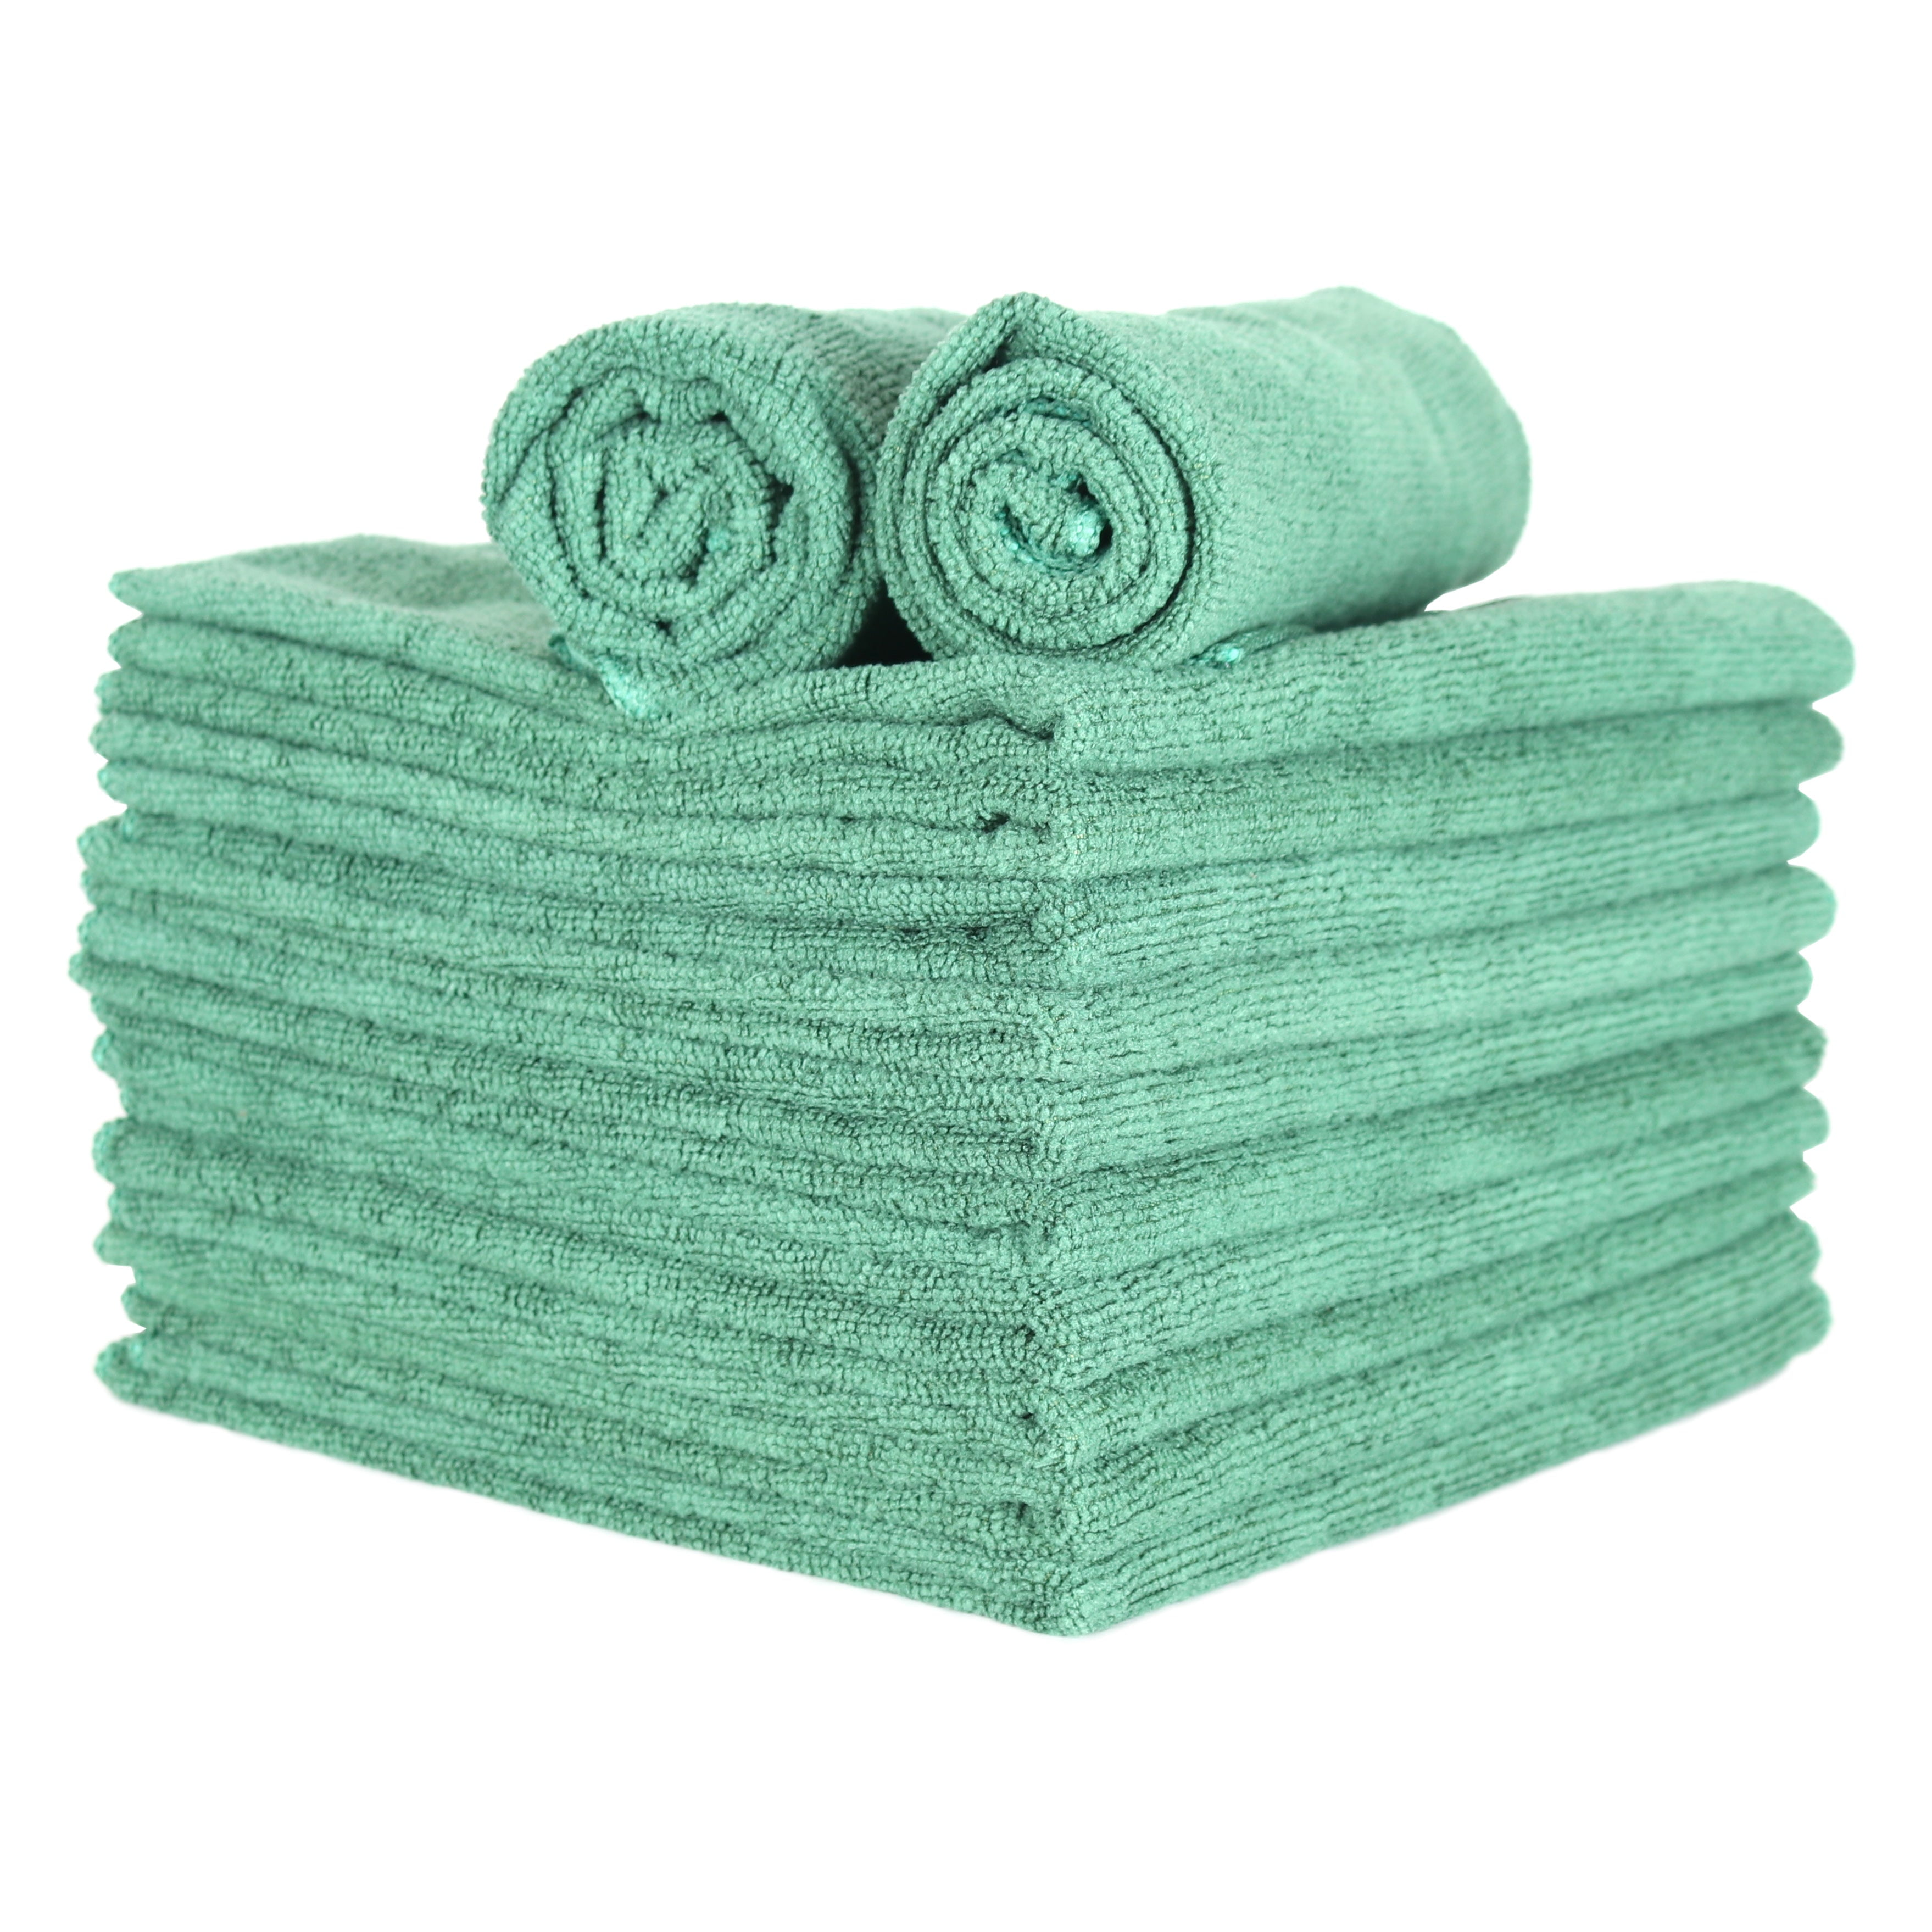 Arkwright White Hand Gym Towels - (Pack of 12) Bulk 100% Cotton Soft Quick  Dry Sweat Absorbent Hotel Quality Towels for Workout, Bathroom, Spa, Pool